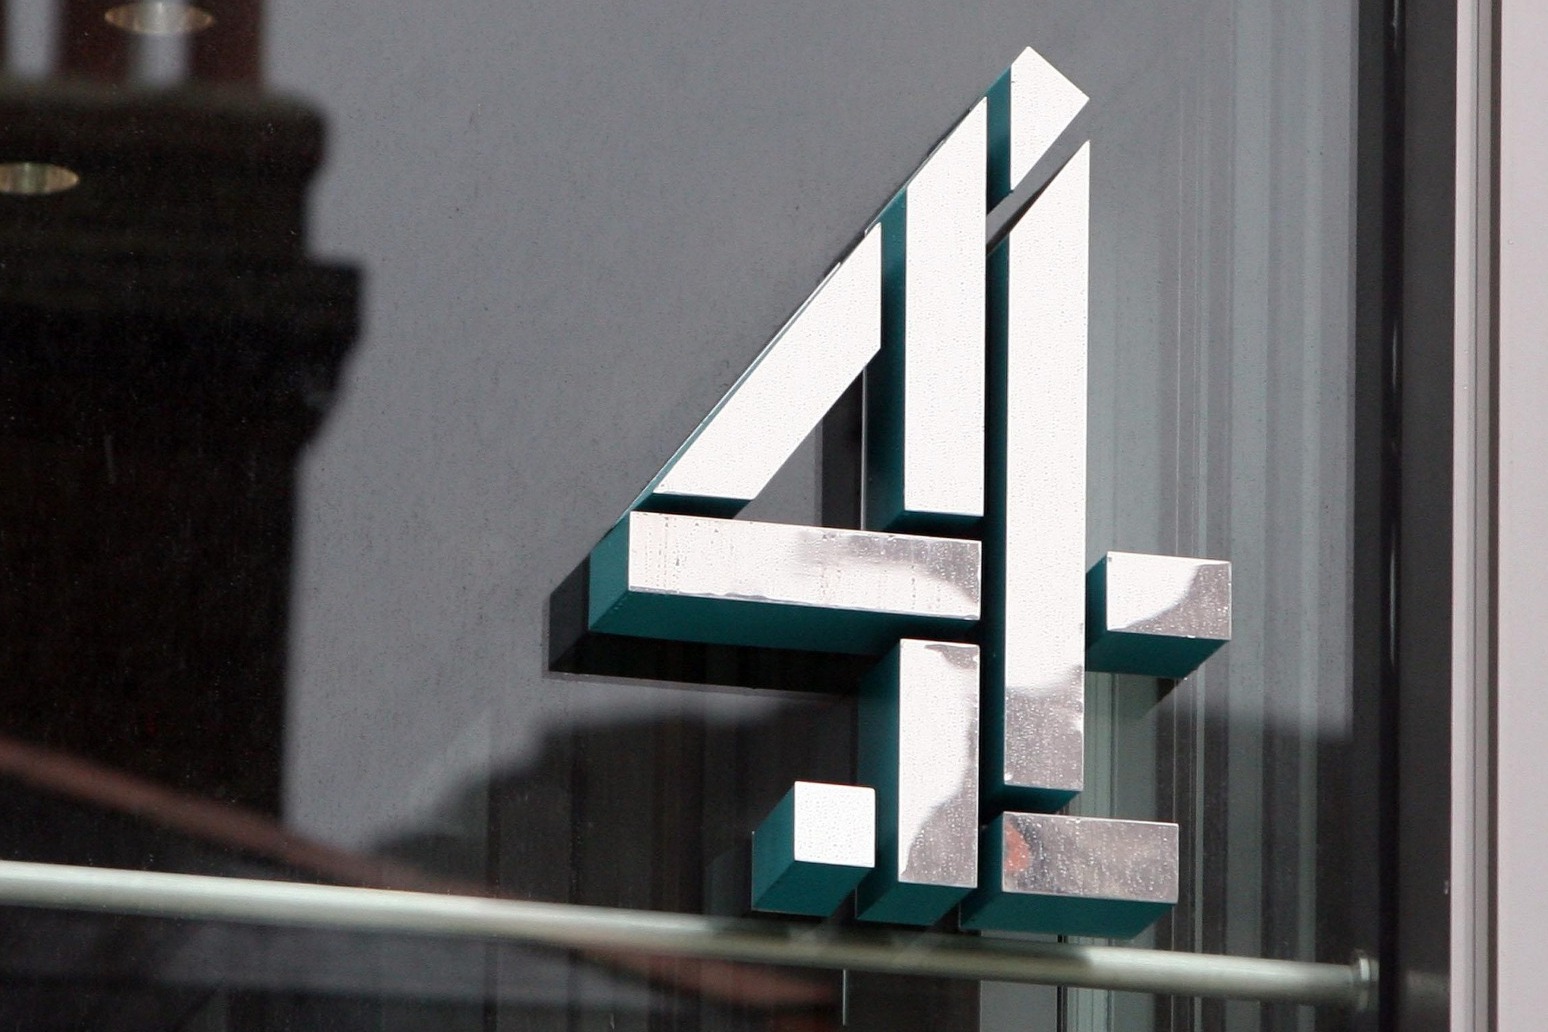 Culture Secretary recommends Government drop Channel 4 privatisation. 